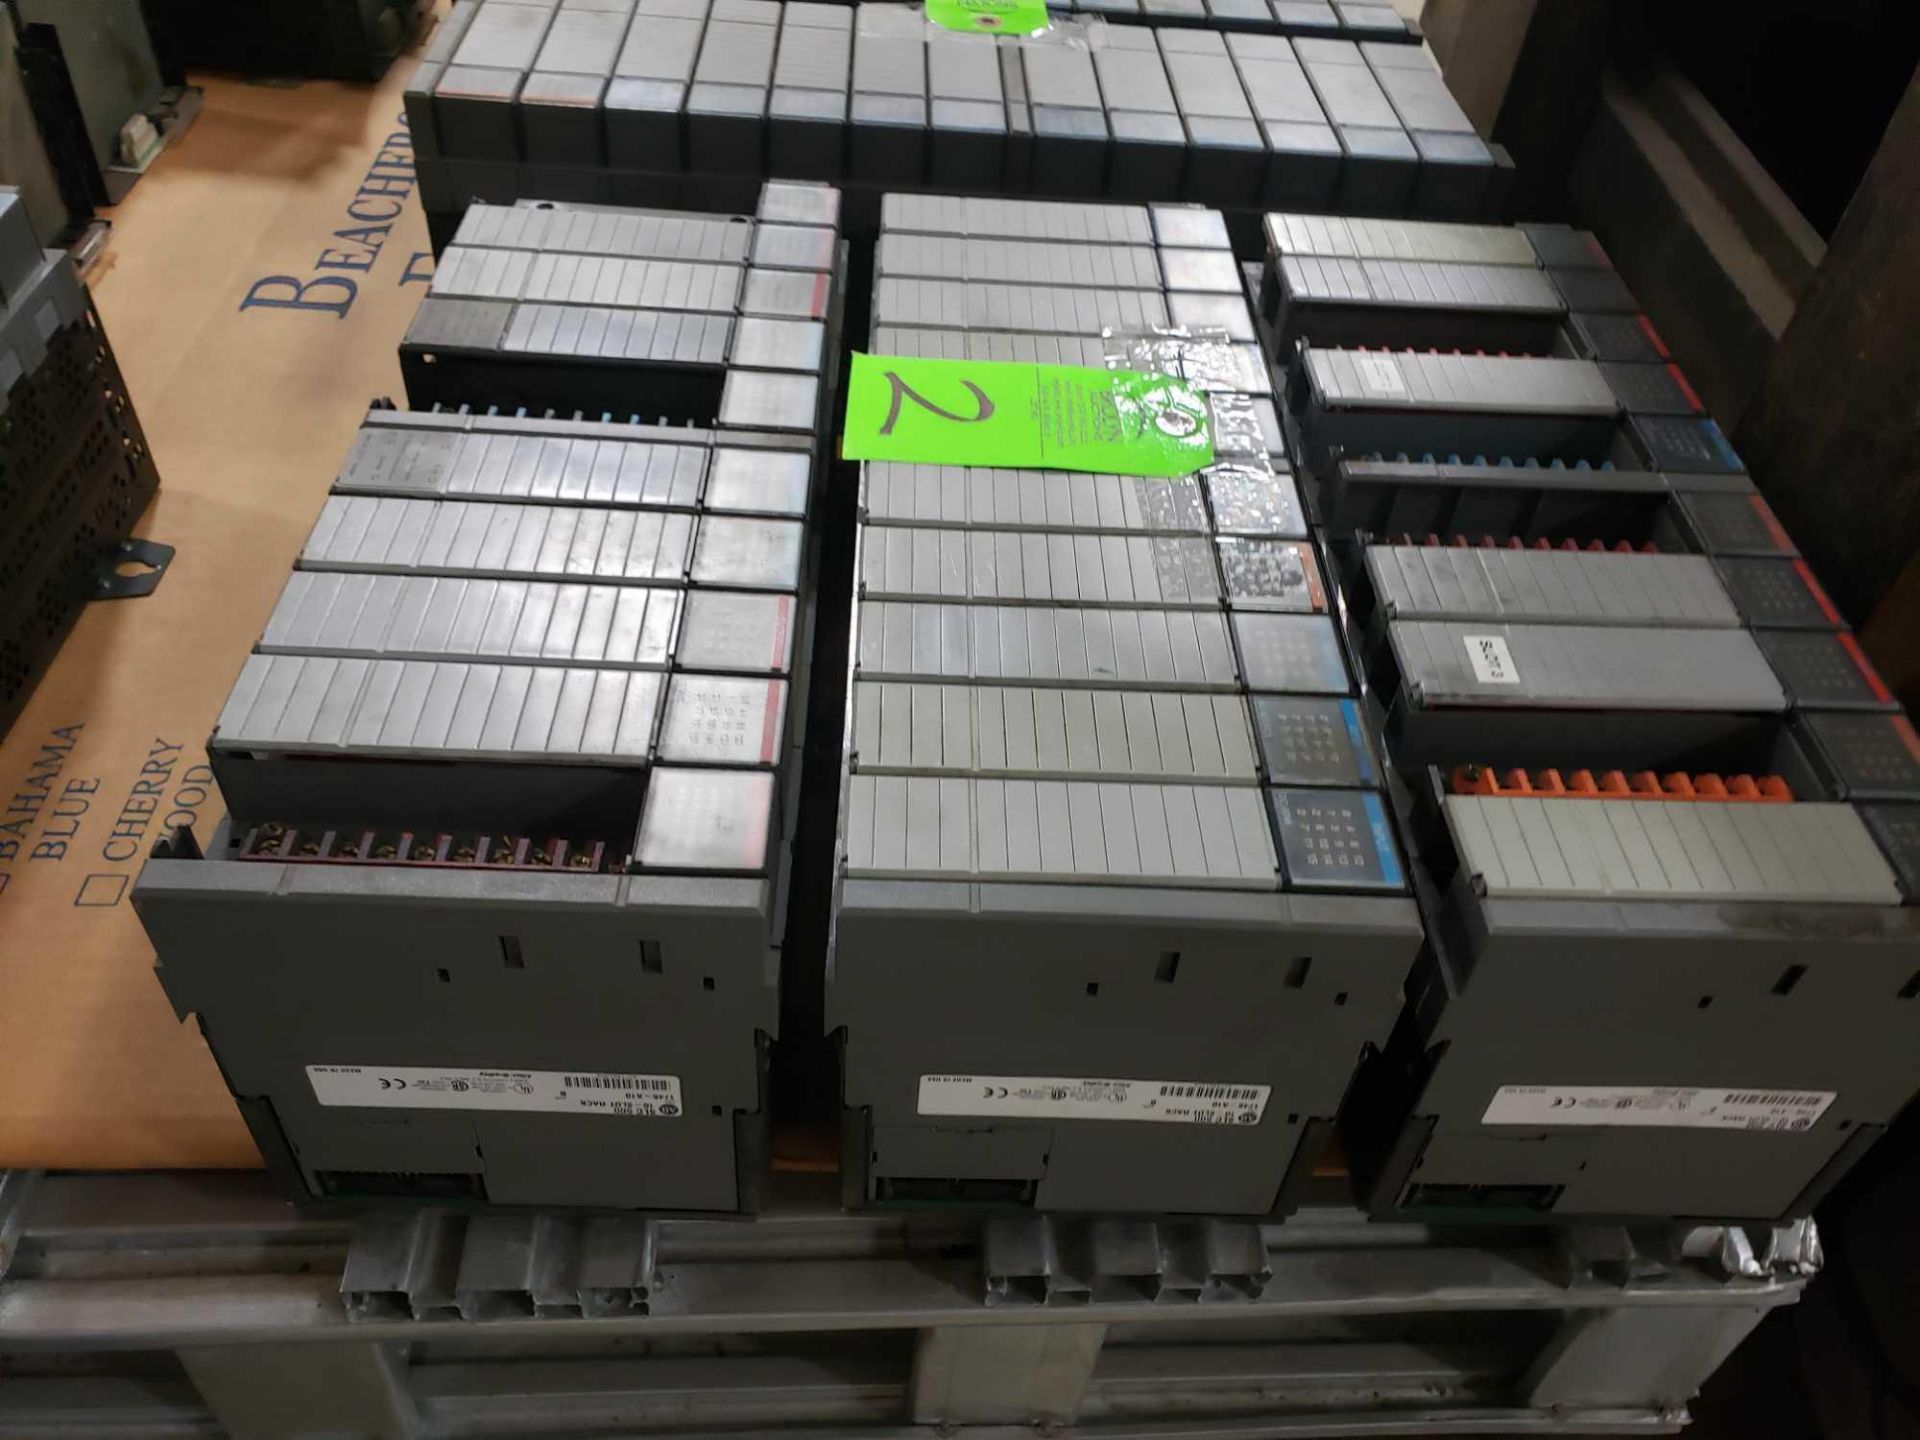 Qty 3 - Allen Bradley SLC500 racks with cards as pictured. - Image 2 of 2